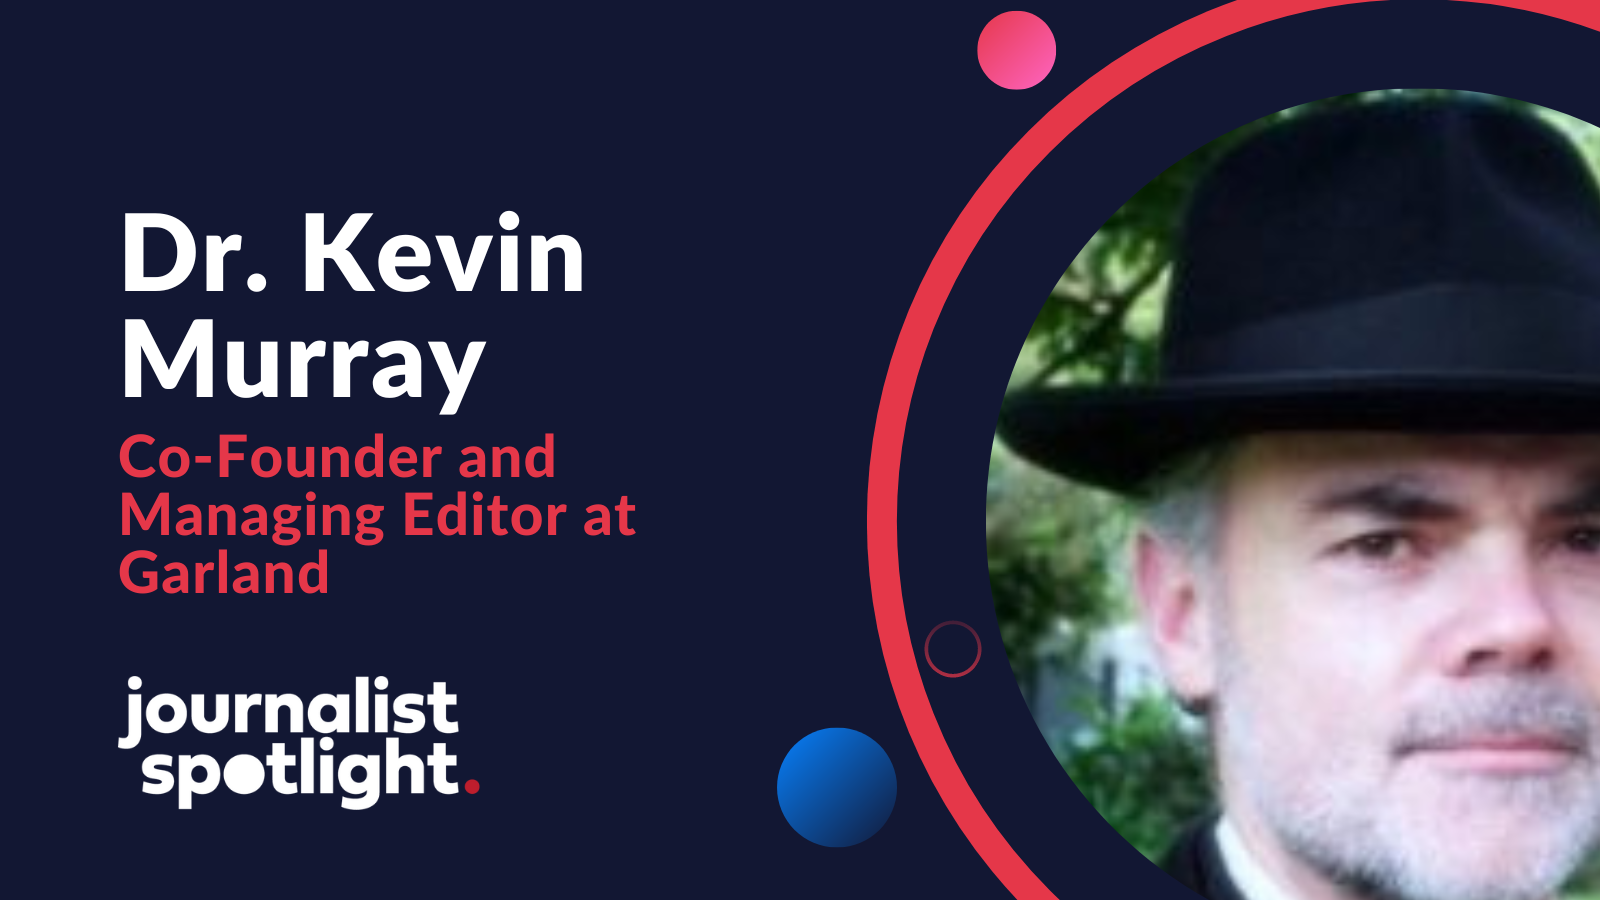 Journalist Spotlight | Interview with Dr. Kevin Murray, Co-Founder and Managing Editor at Garland